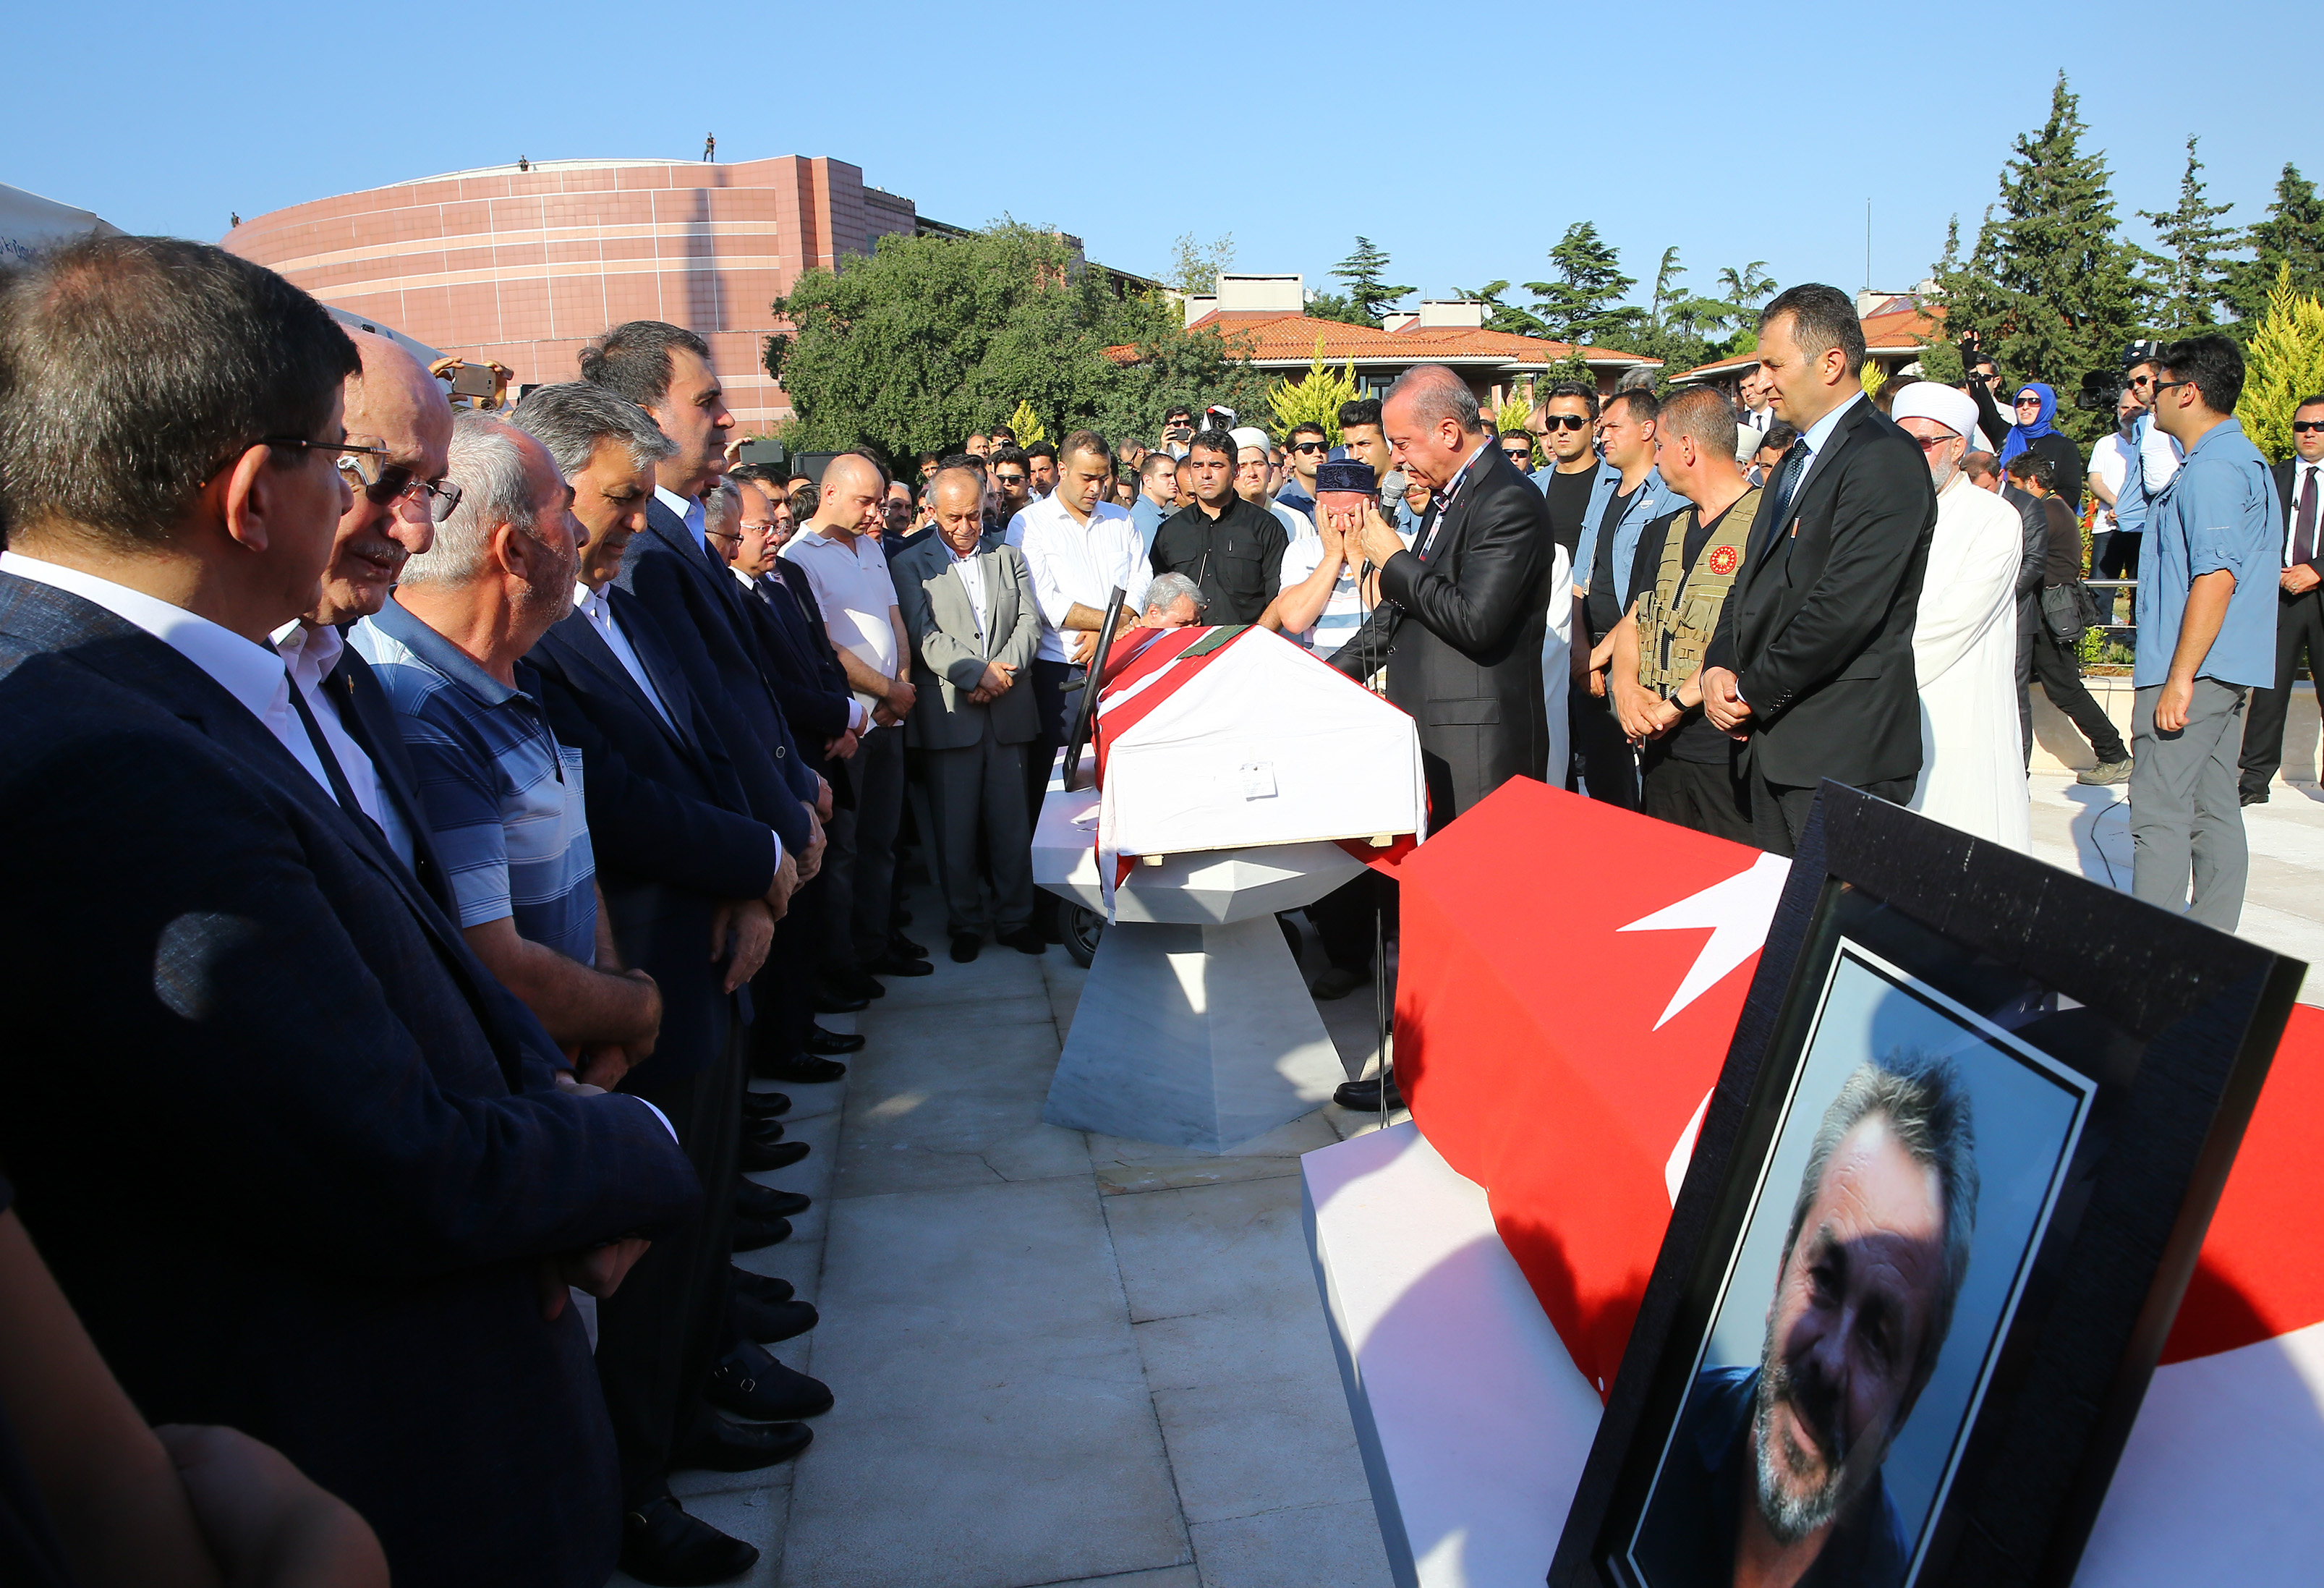 July 15 martyrs Mustafa Cambaz, Erol Olçok and Abdullah Tayyip Olçok’s funeral prayer took place at the mosque at the Faculty of Theology of Marmara University.